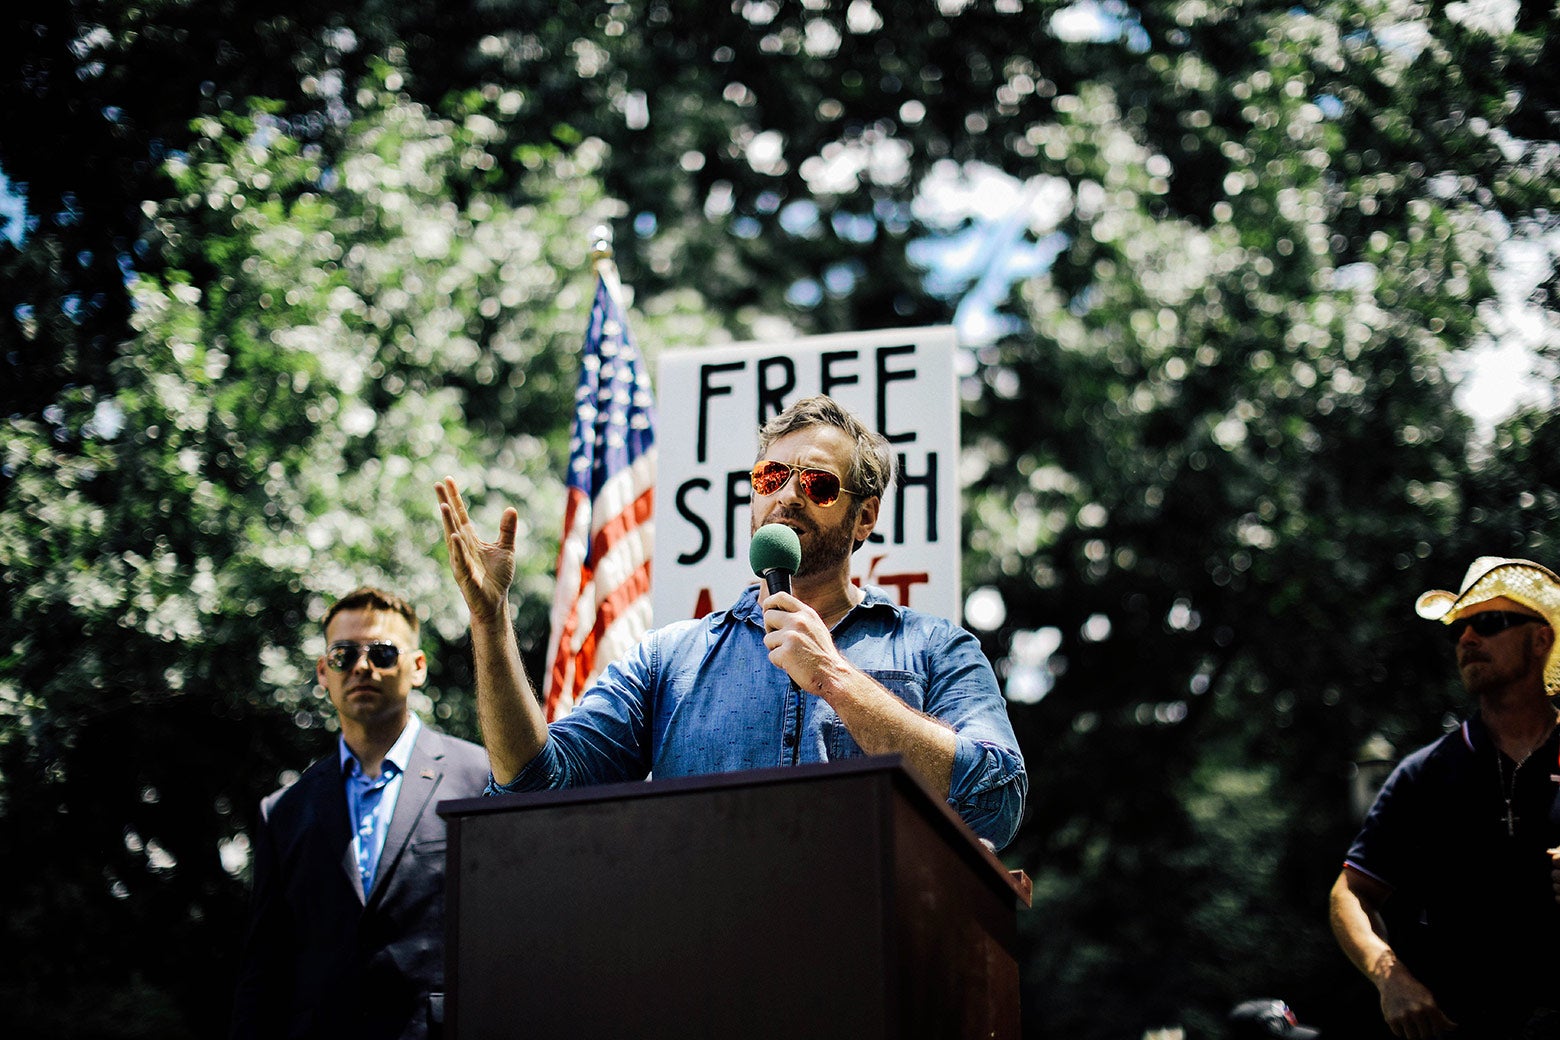 Mike Cernovich speaks during a rally with a sign that says "Free Speech" in the background.